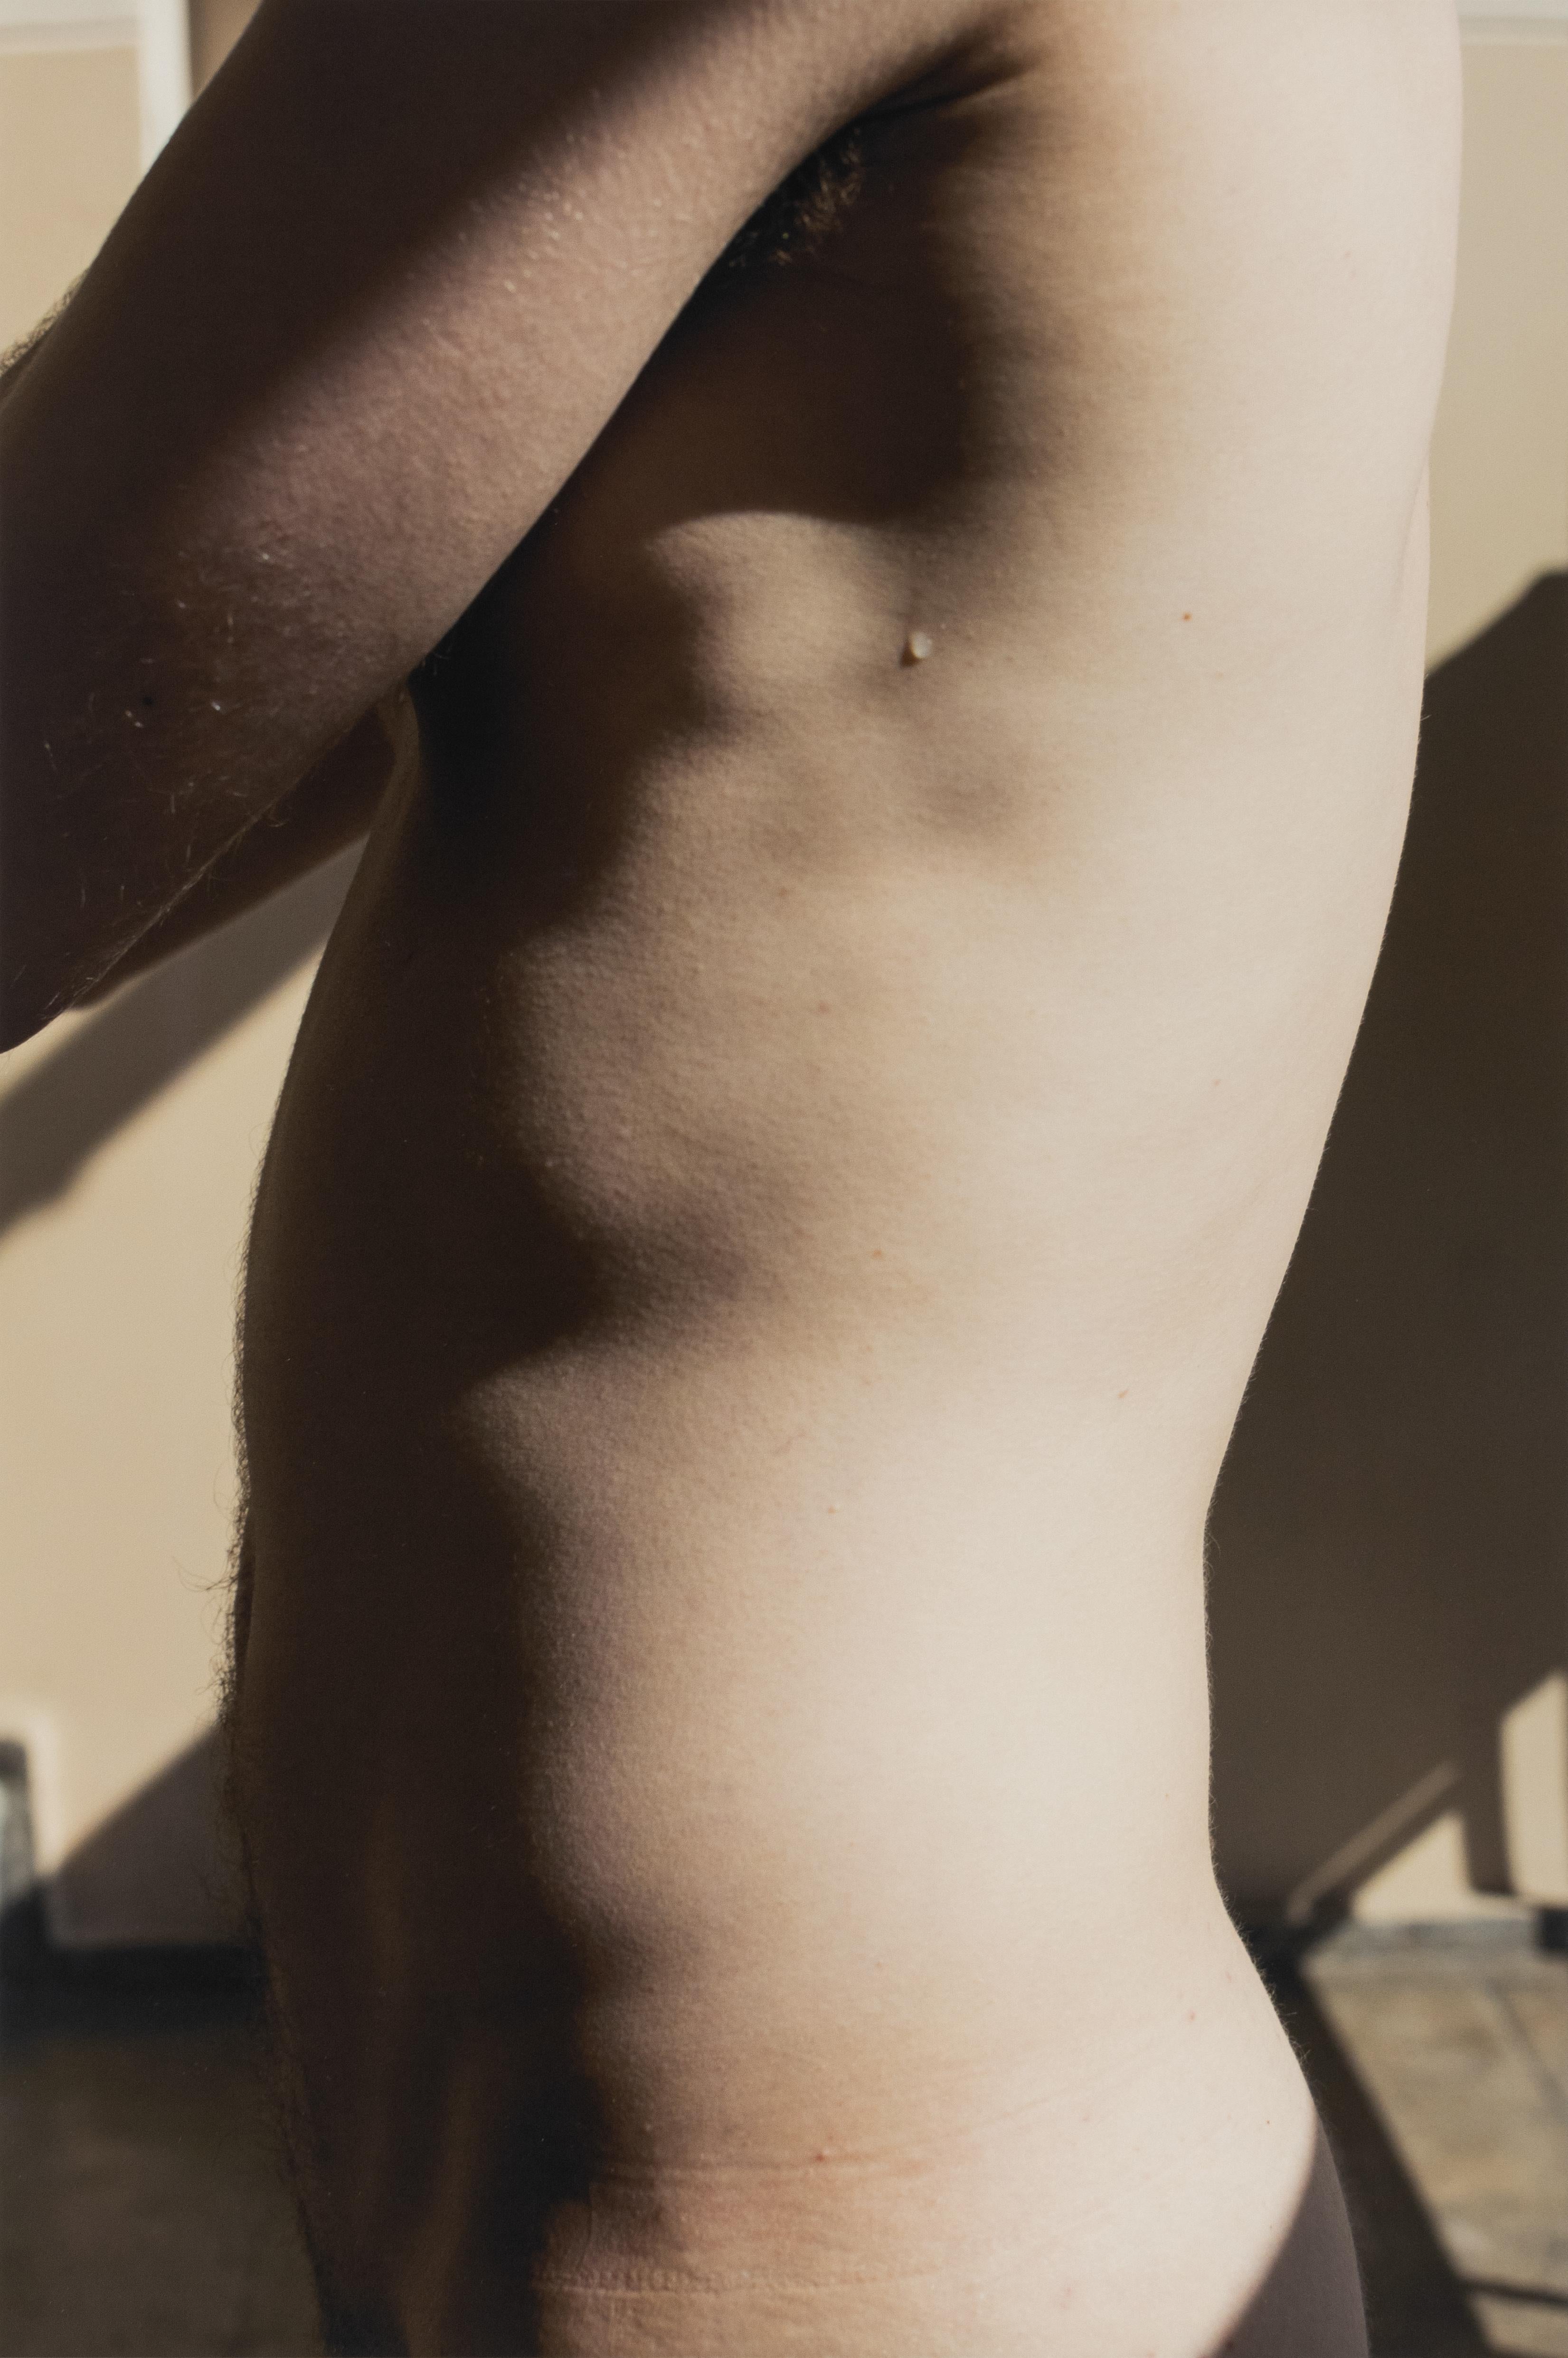 Flanke - Photograph by Wolfgang Tillmans